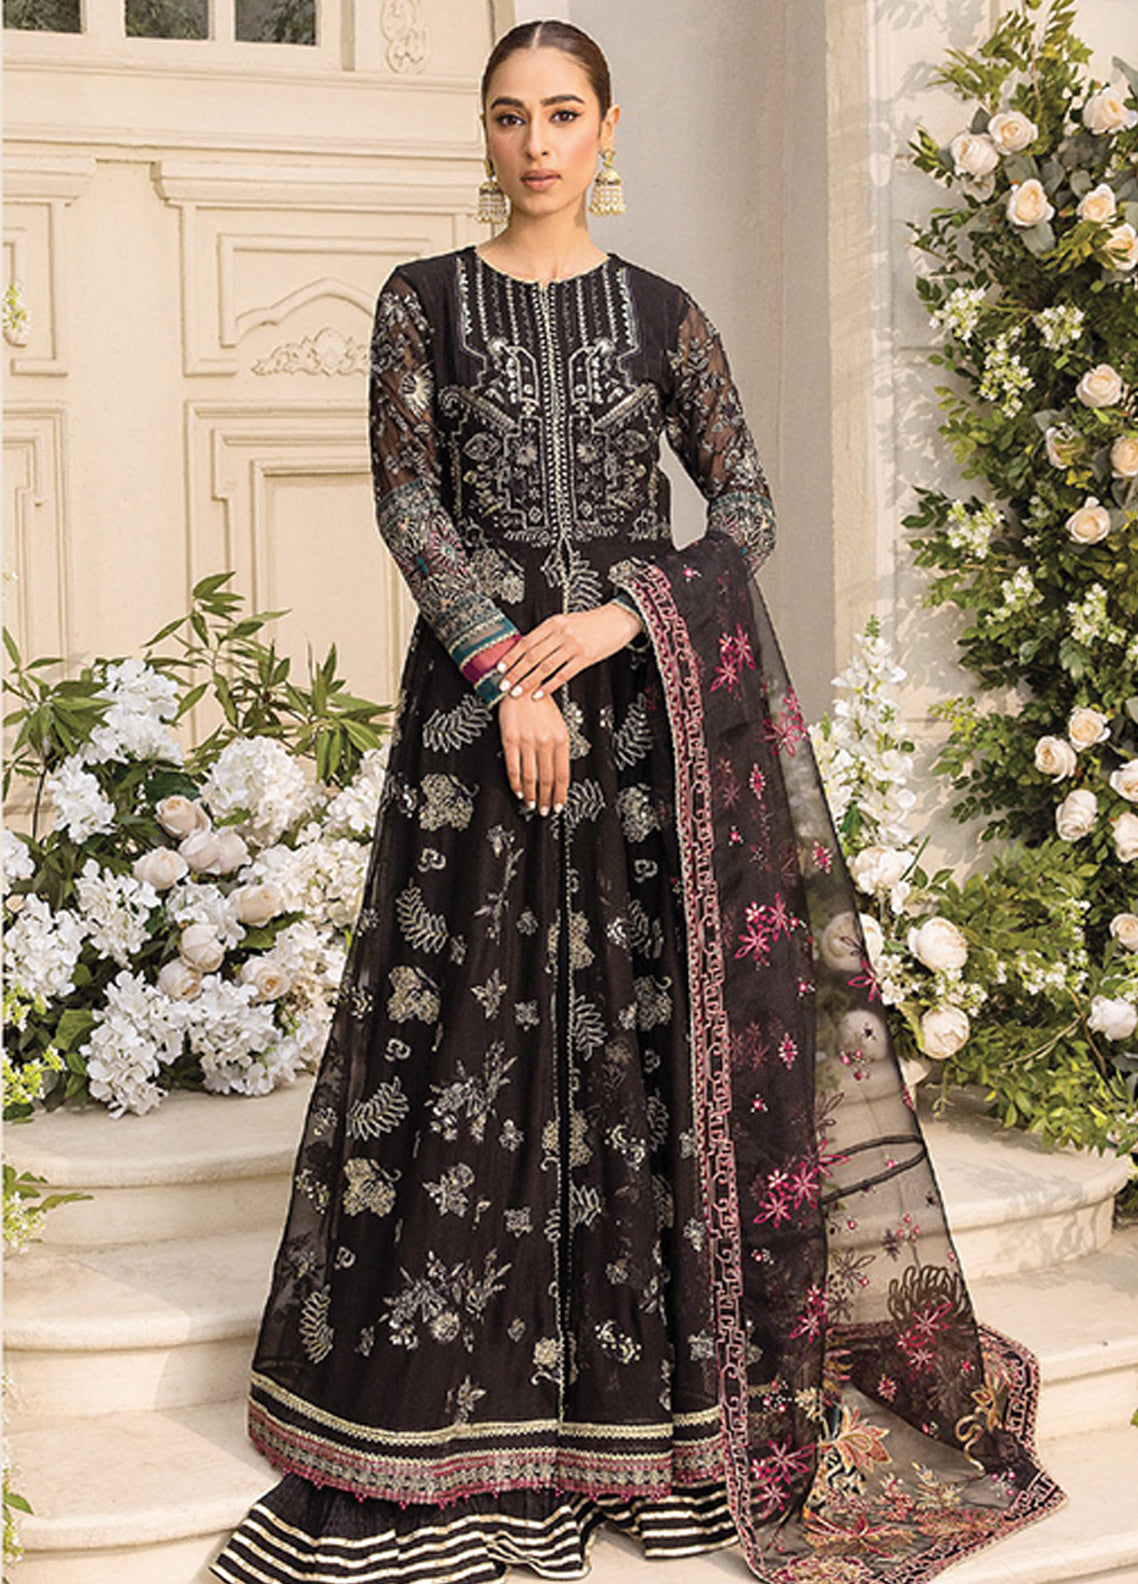 D#06 Xenia Ishya Luxury Formal Emb Collection 223